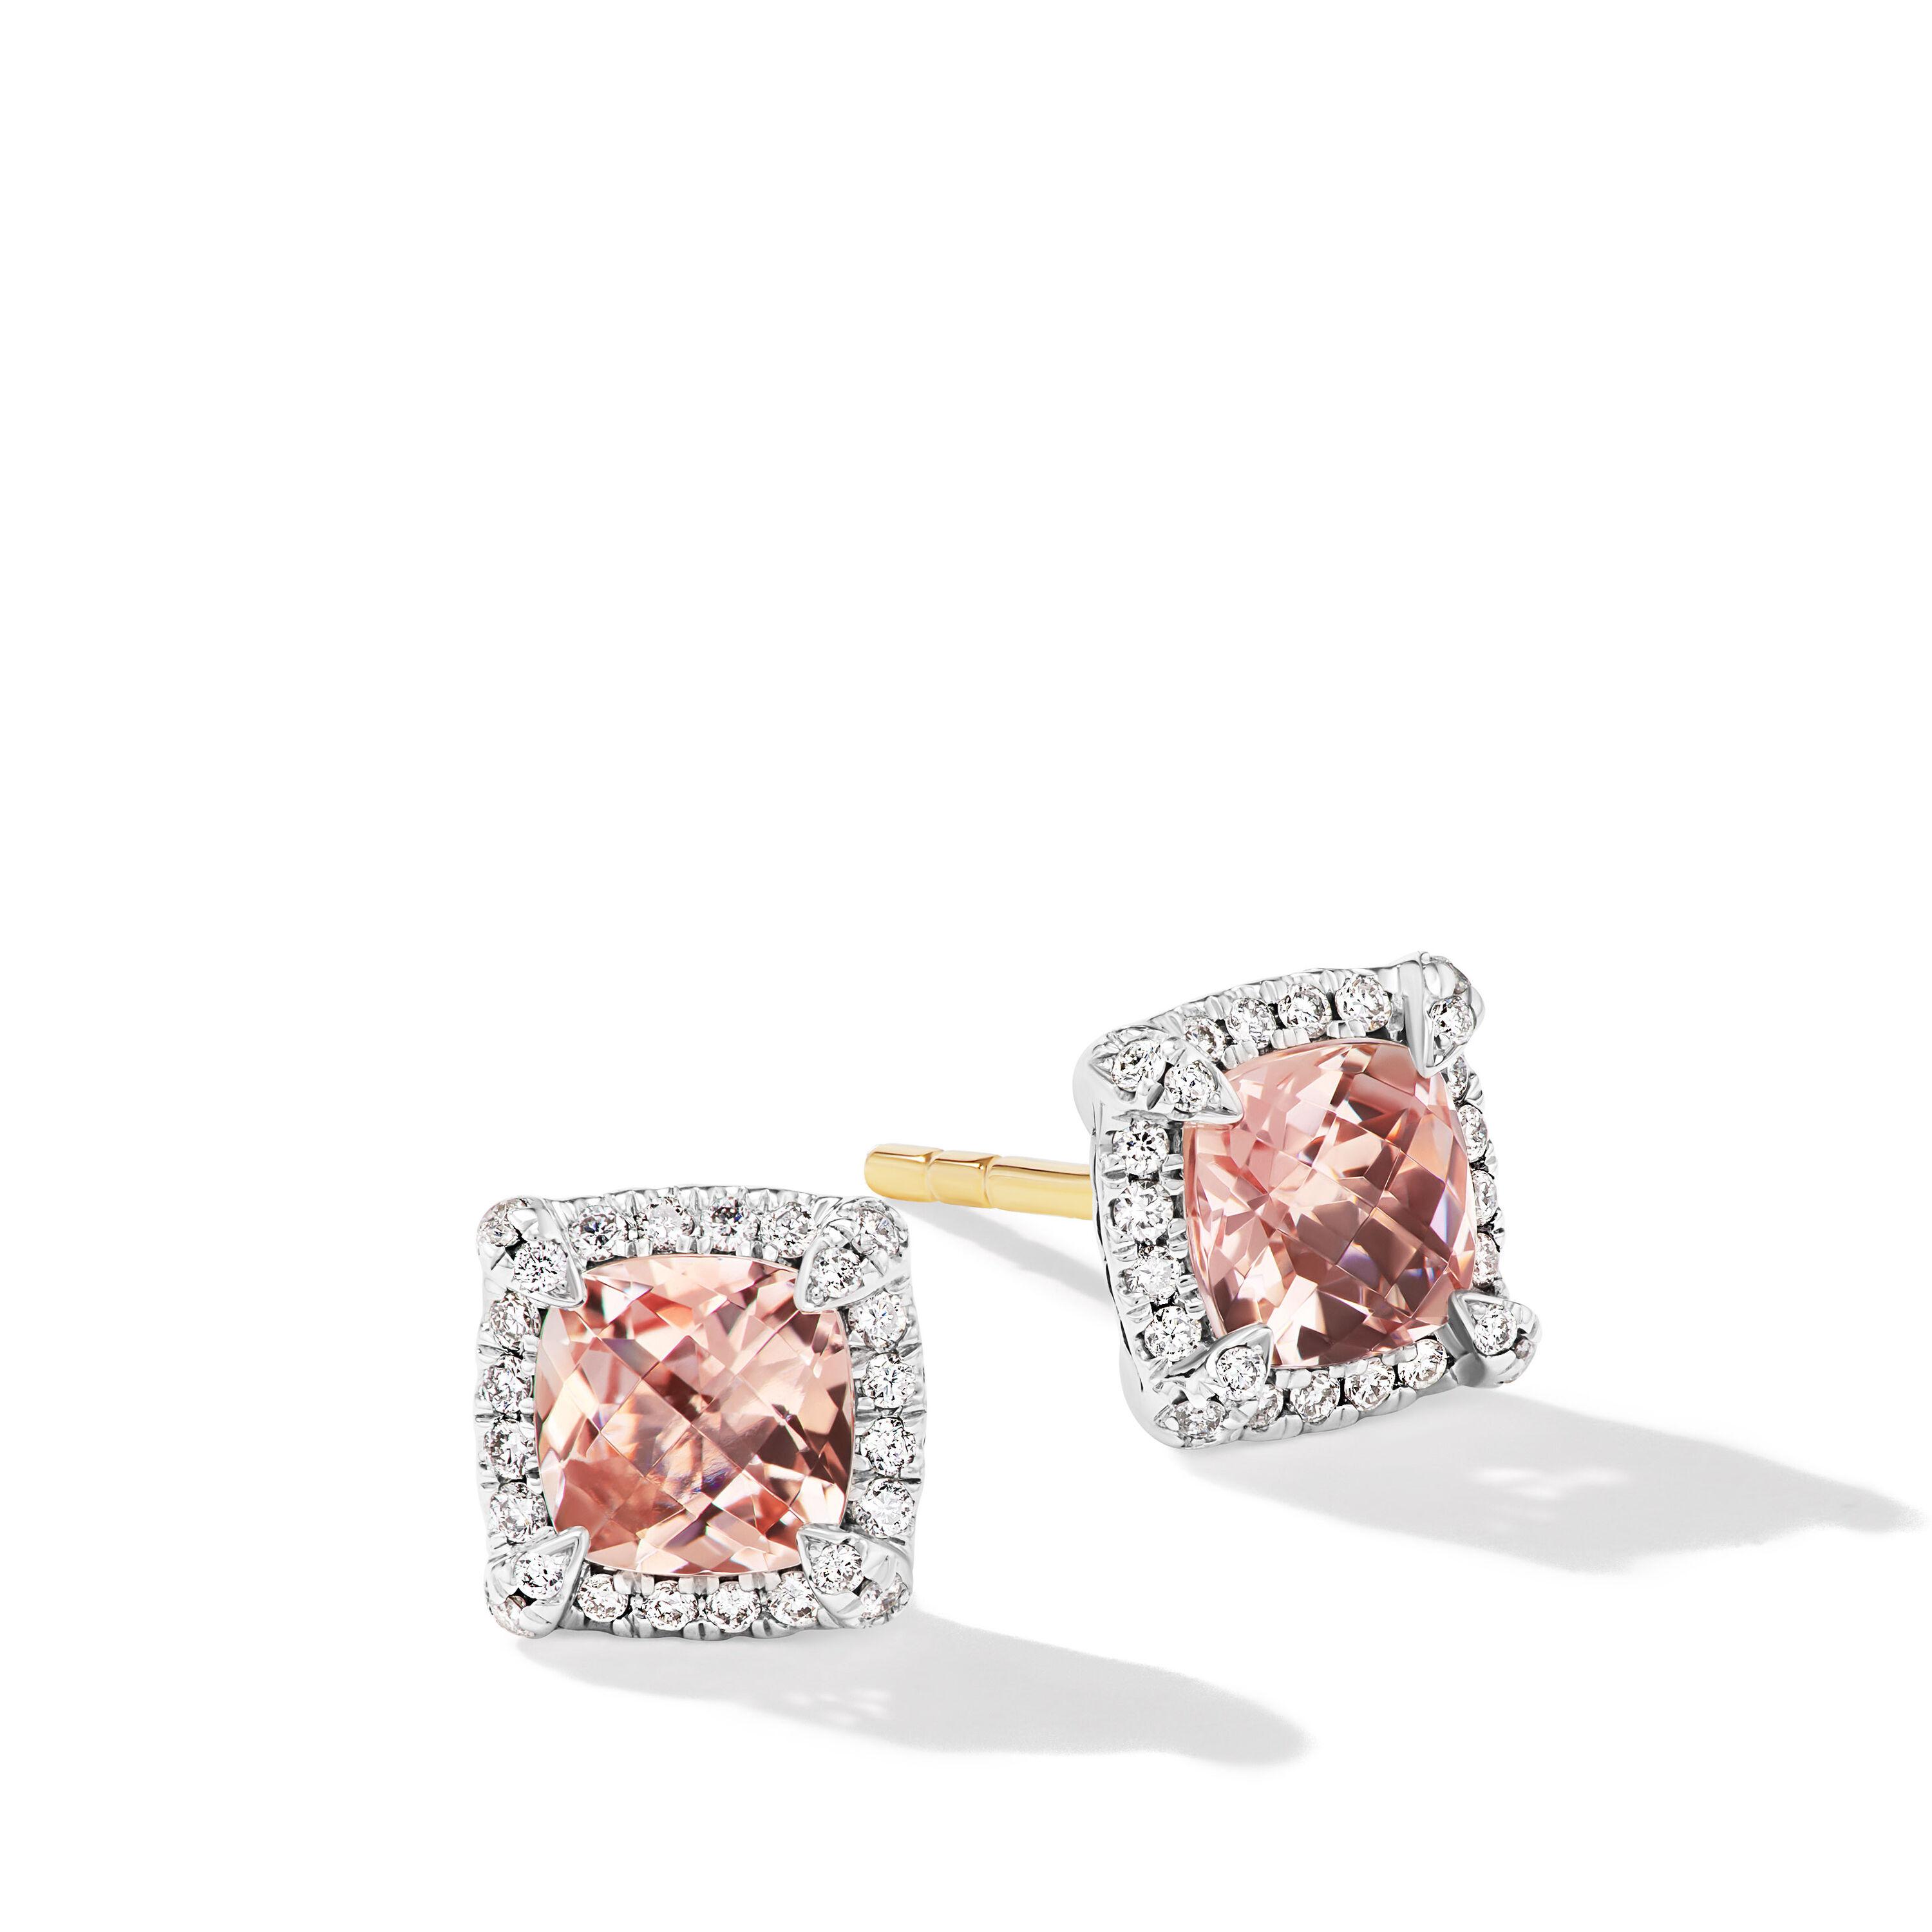 David Yurman Petite Chatelaine Pave Bezel Stud Earrings in Sterling Silver with Morganite and Diamonds